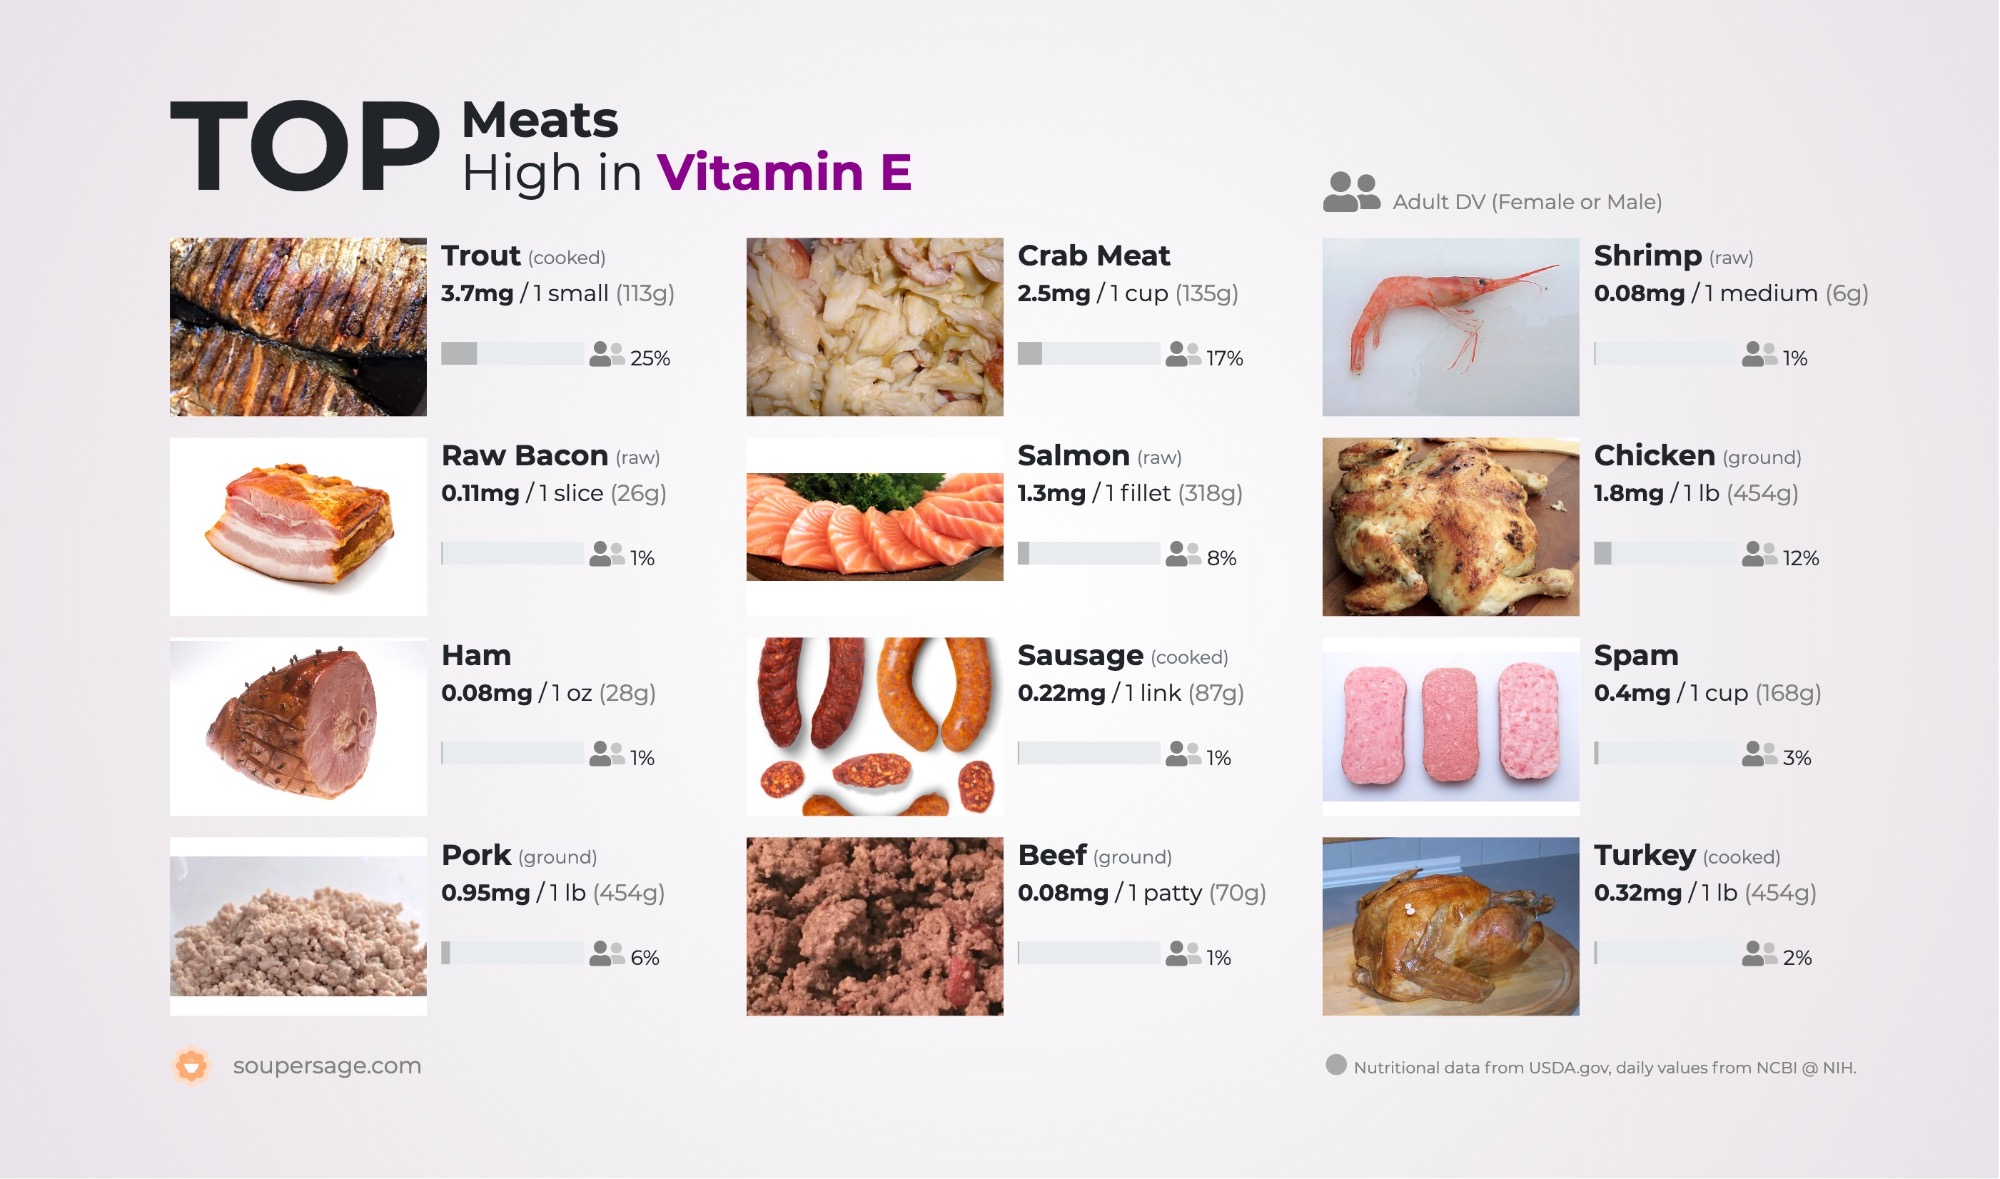 image of Top Meats High in Vitamin E